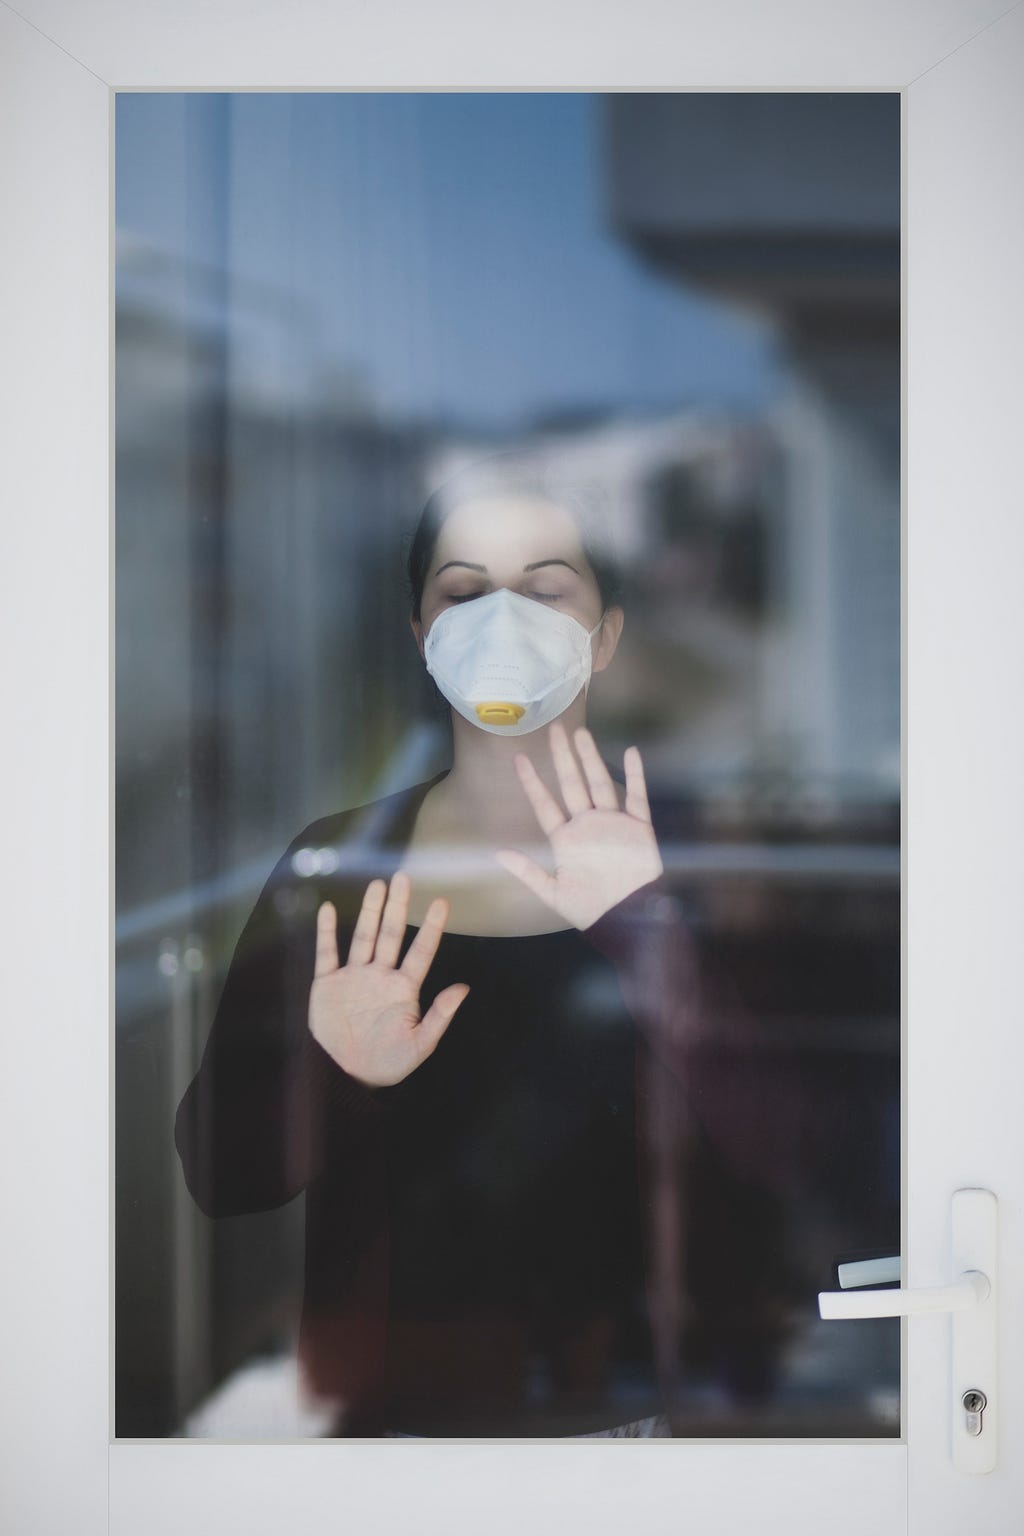 Photo of woman with face mask behind glass wall. Photo posted on Dr. James Goydos 2021 article about mask requirements and debate between Dr. Fauci and Rep. Jordan